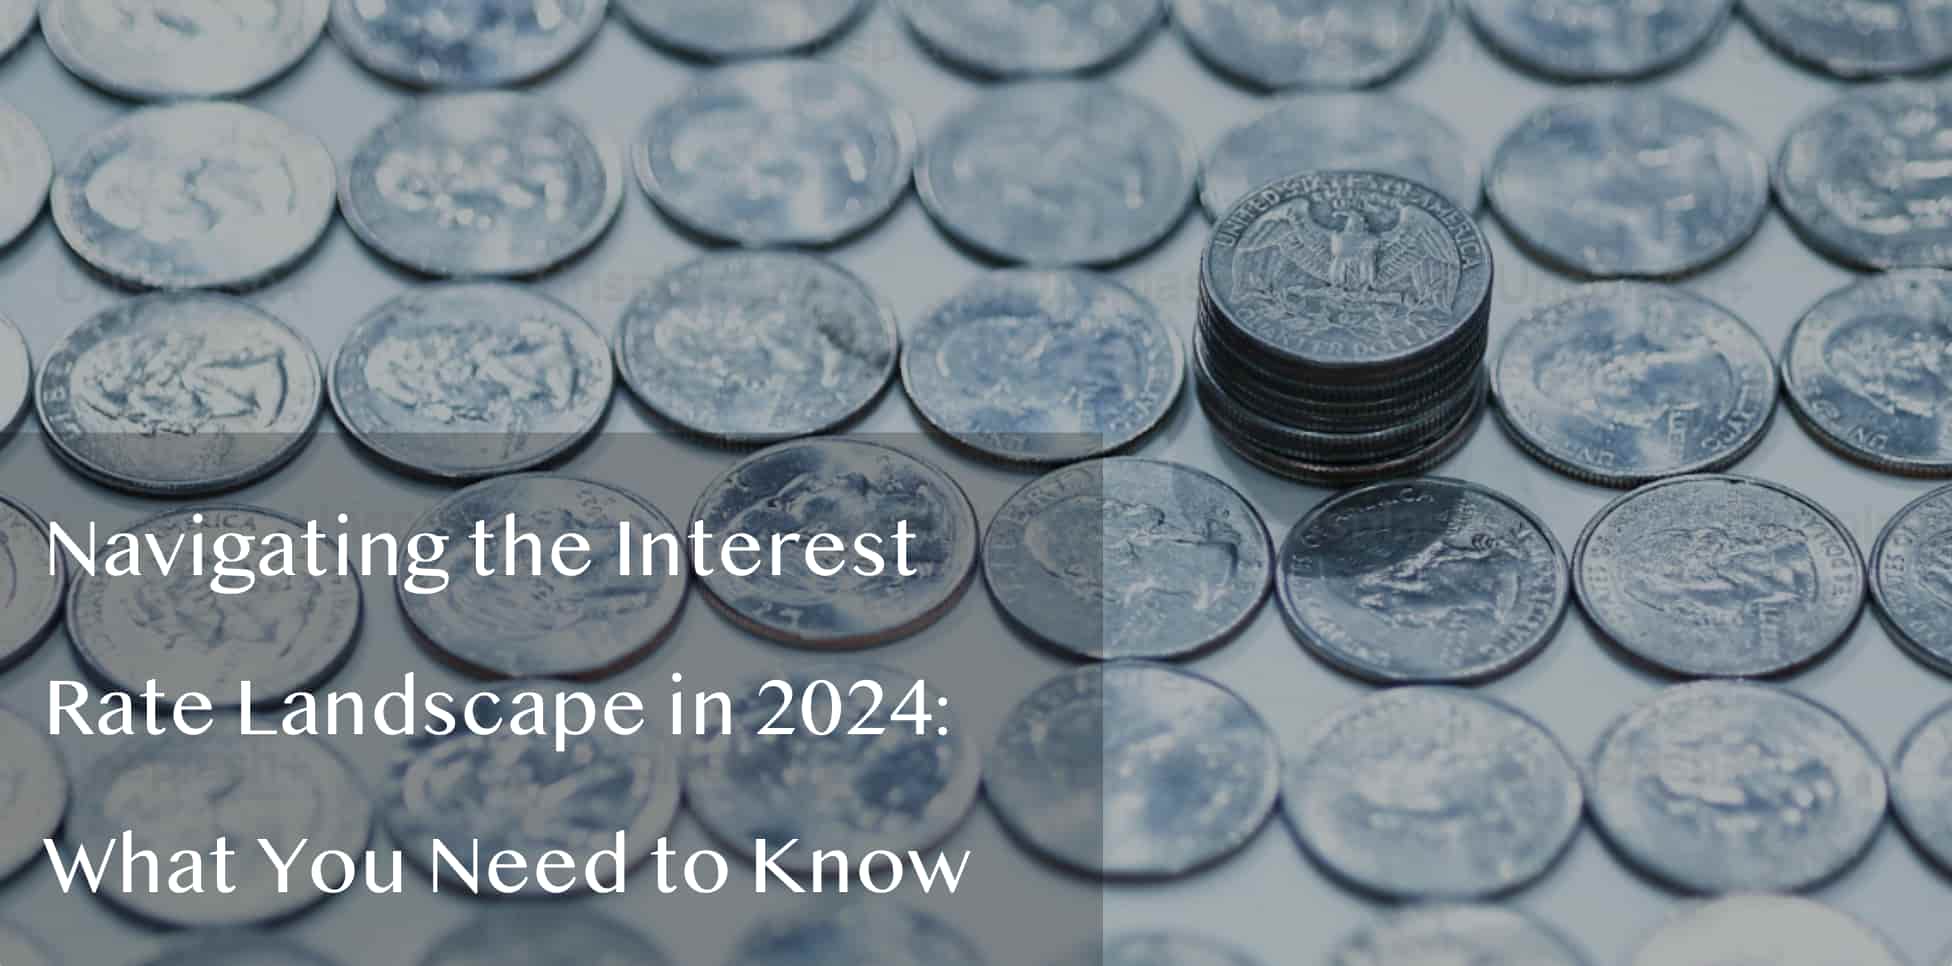 Navigating the Interest Rate Landscape in 2024: What You Need to Know